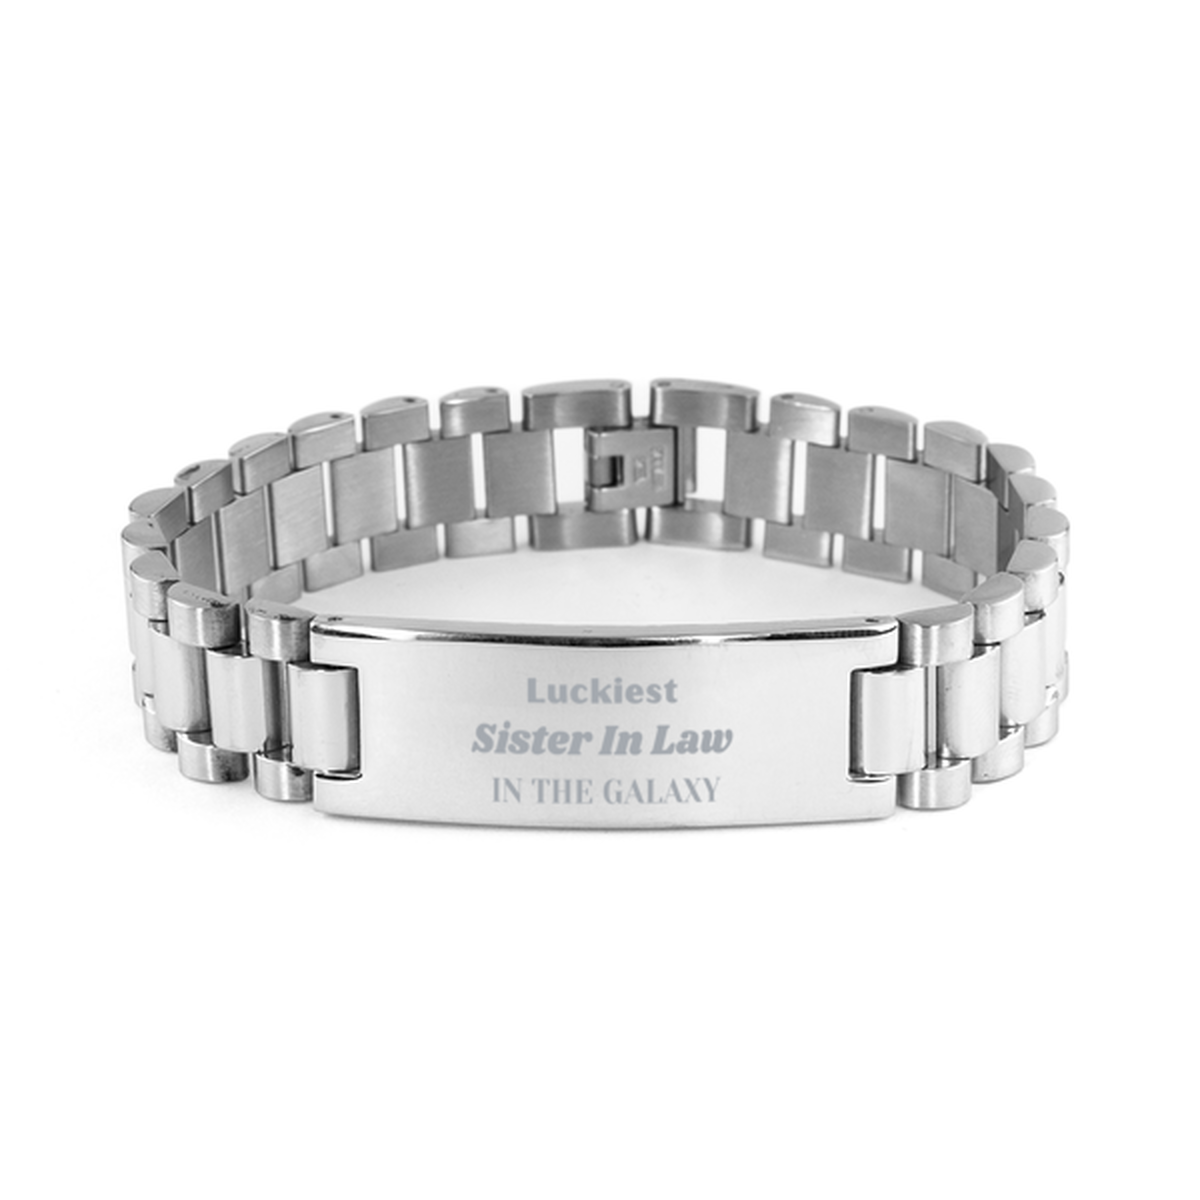 Luckiest Sister In Law in the Galaxy, To My Sister In Law Engraved Gifts, Christmas Sister In Law Ladder Stainless Steel Bracelet Gifts, X-mas Birthday Unique Gifts For Sister In Law Men Women